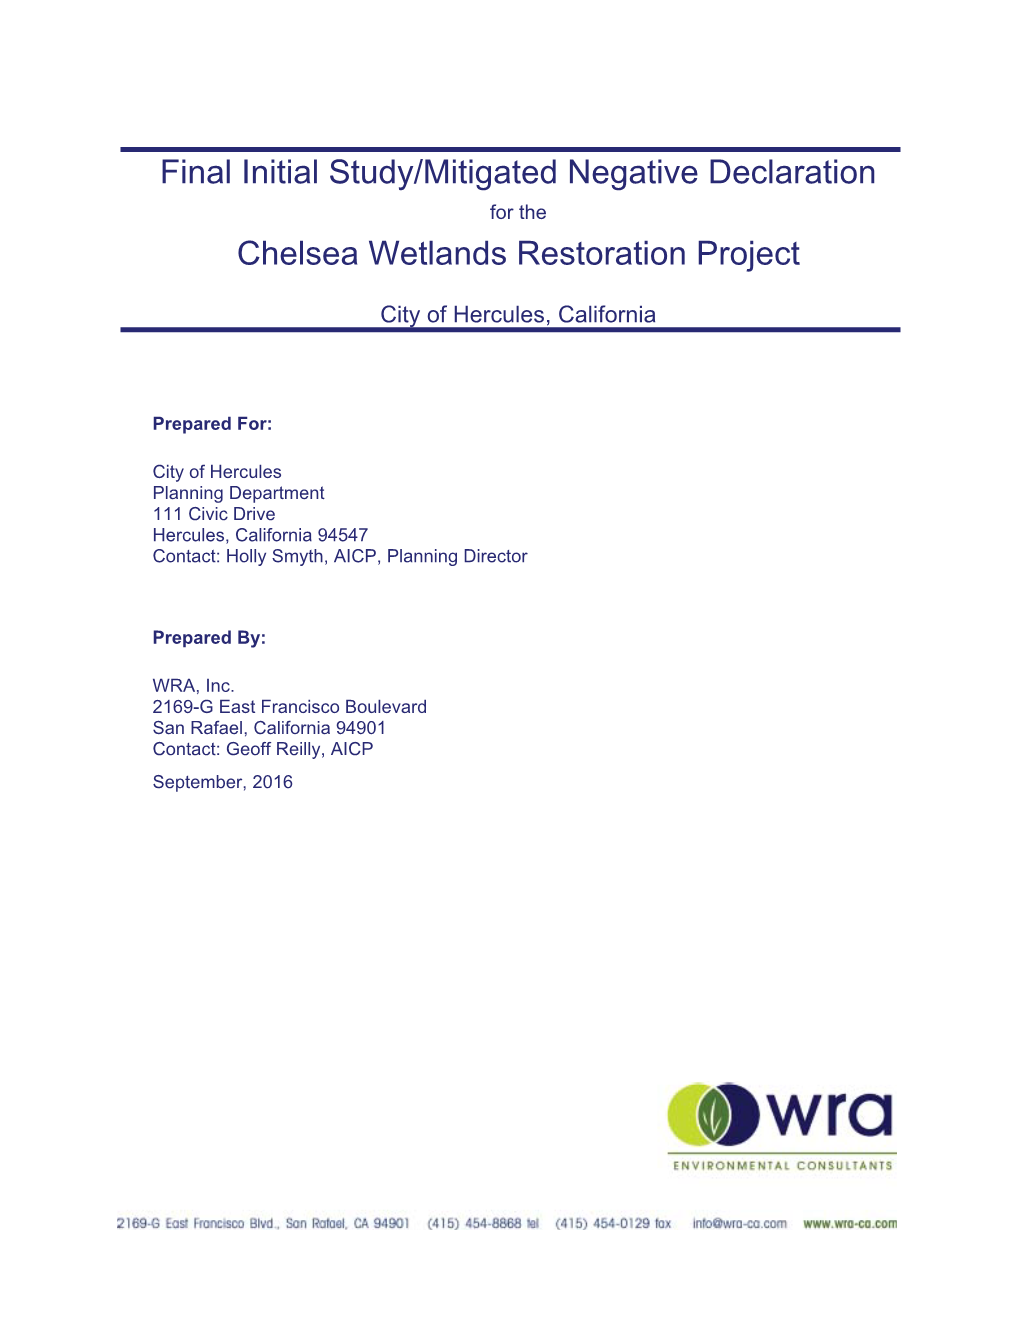 Final Initial Study/Proposed Mitigated Negative Declaration for The